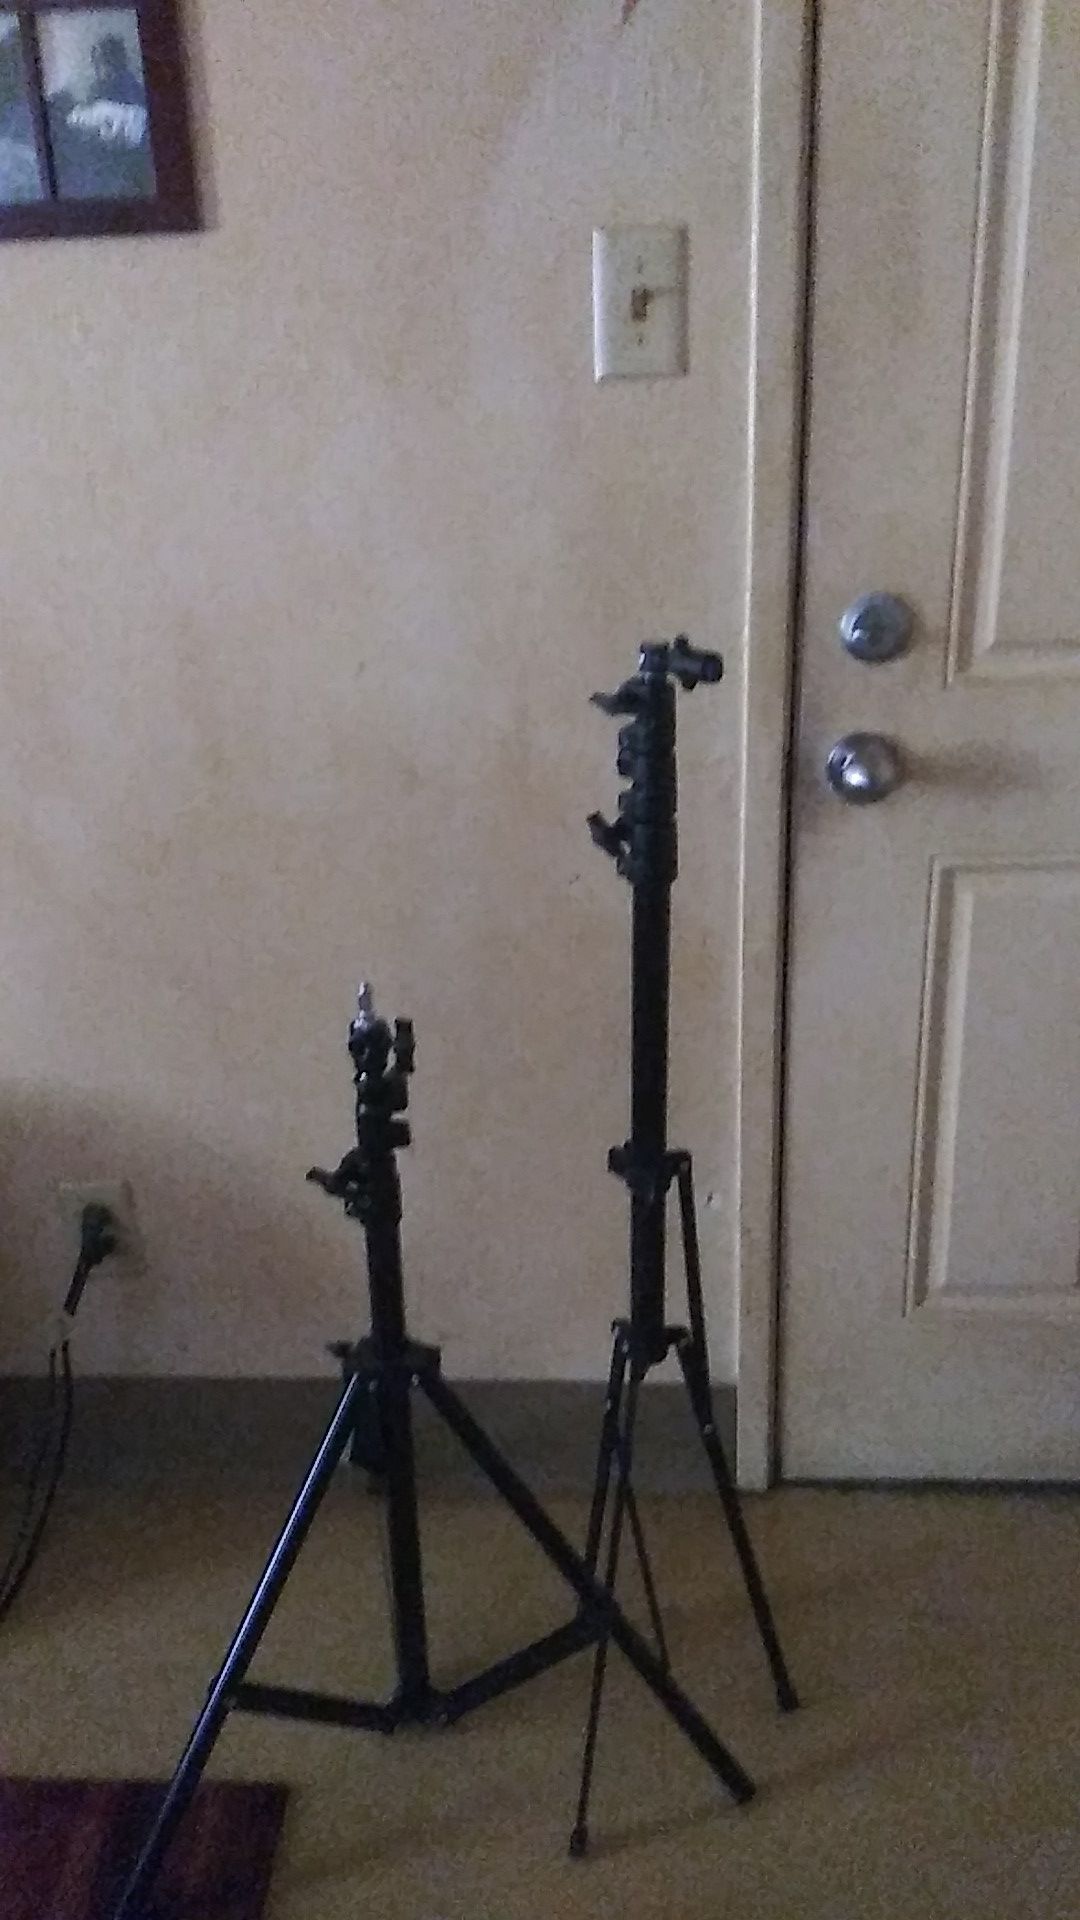 Flashpoint 7 ft camera stand